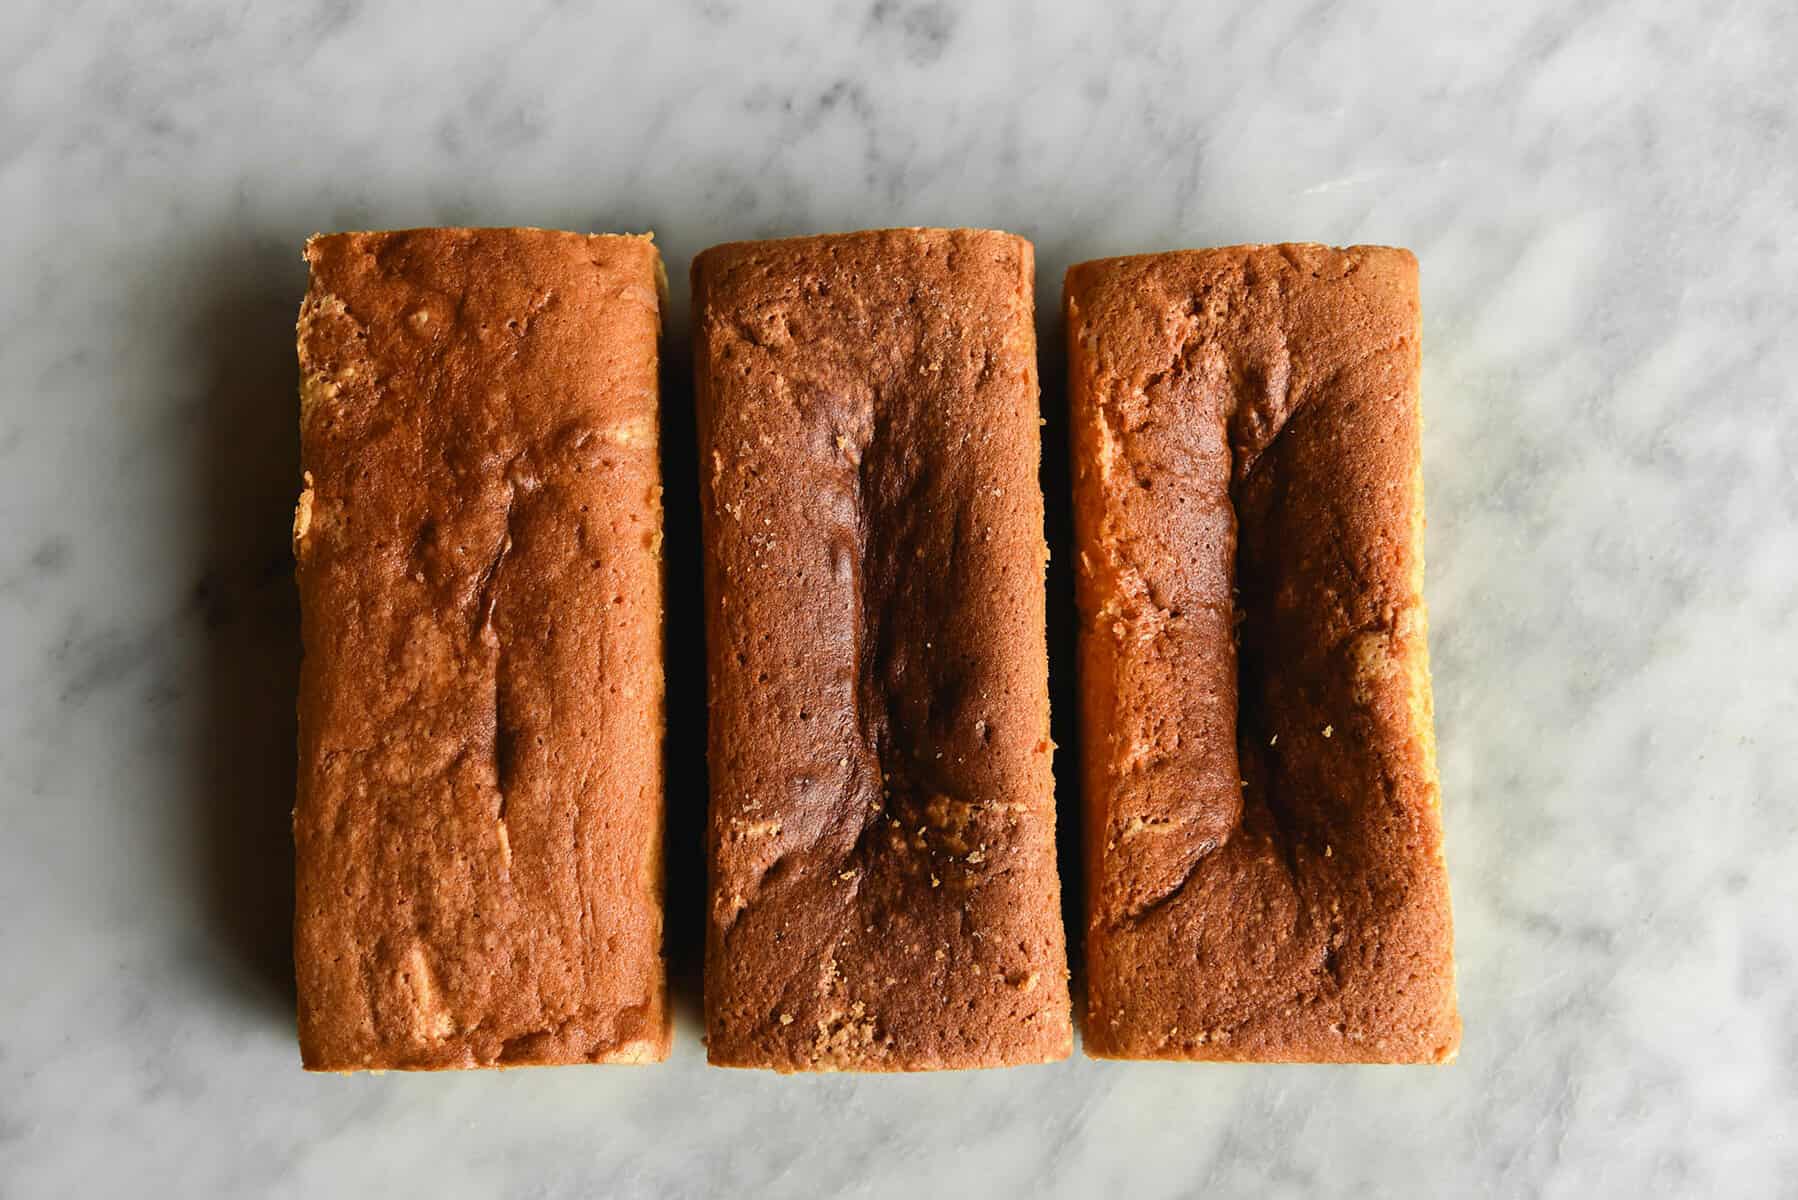 A comparison of three gluten free lemon drizzle cakes with different amounts of baking powder